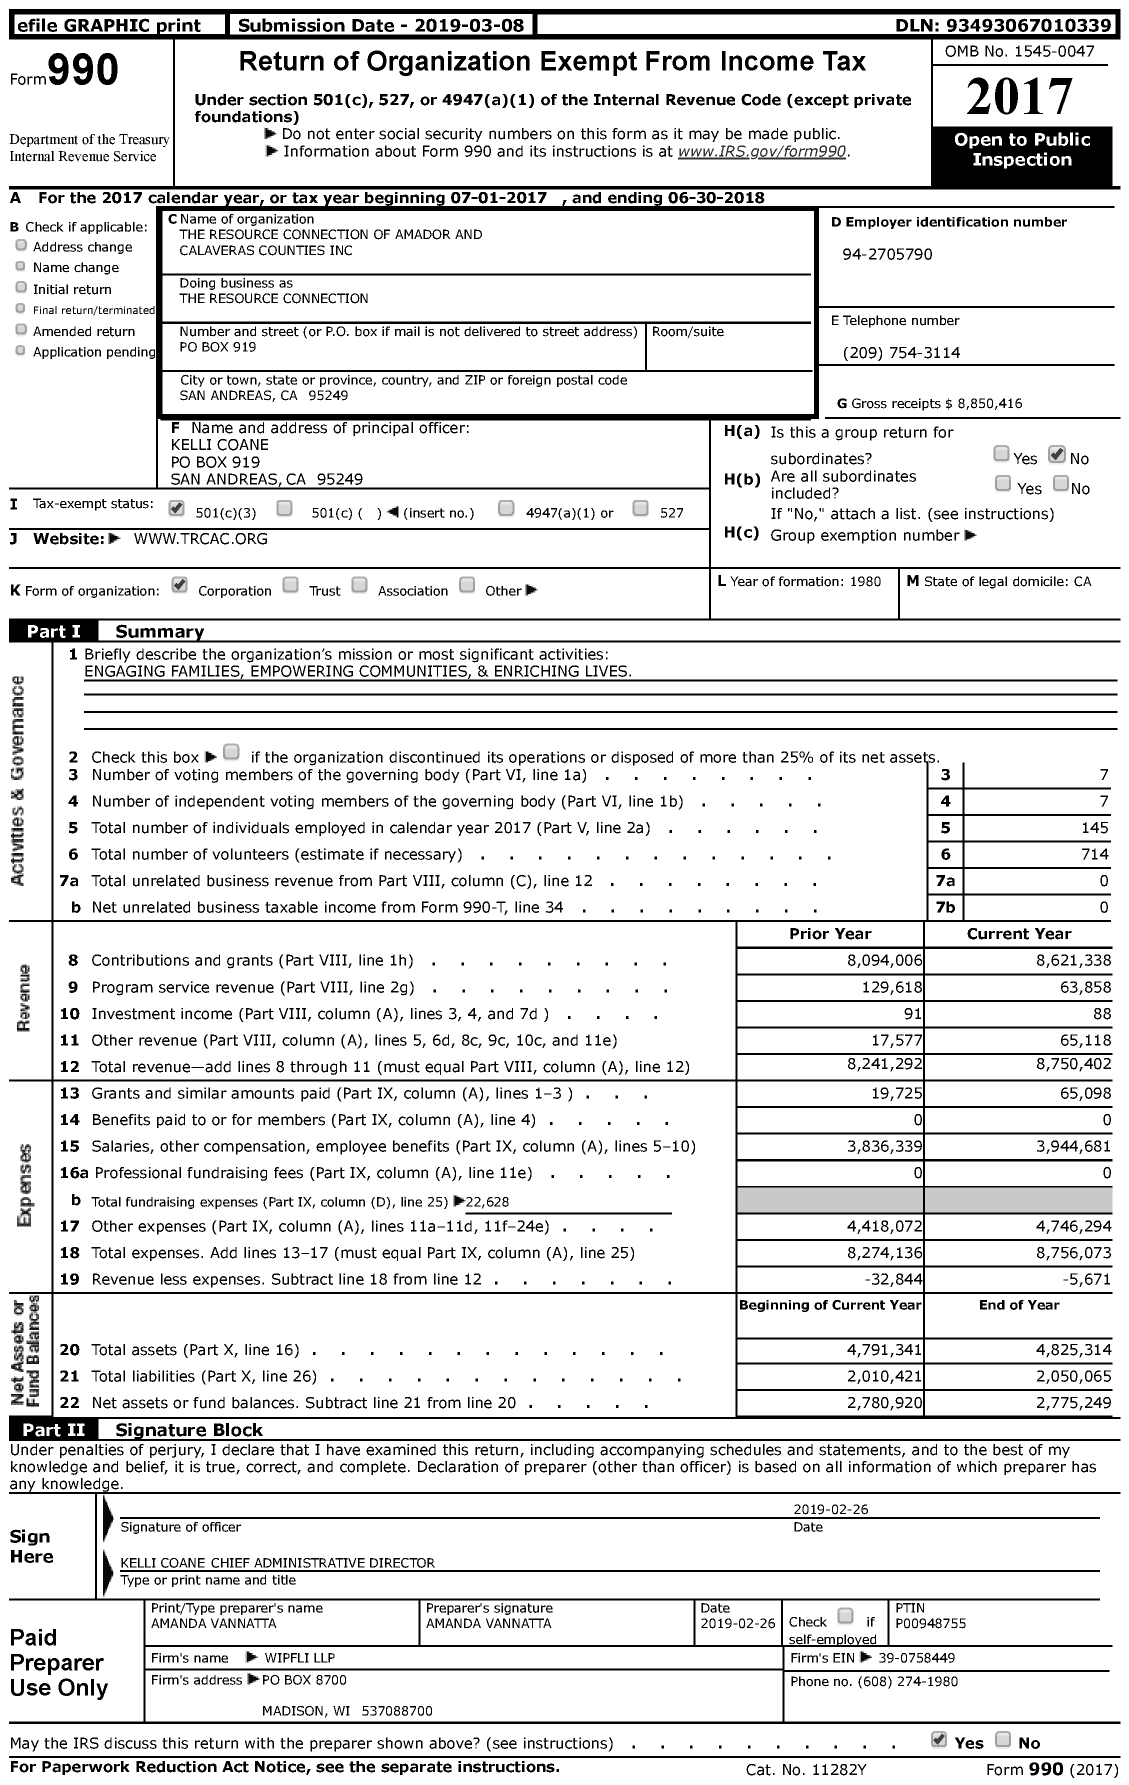 Image of first page of 2017 Form 990 for The Resource Connection of Amador and Calaveras Counties (TRCAC)